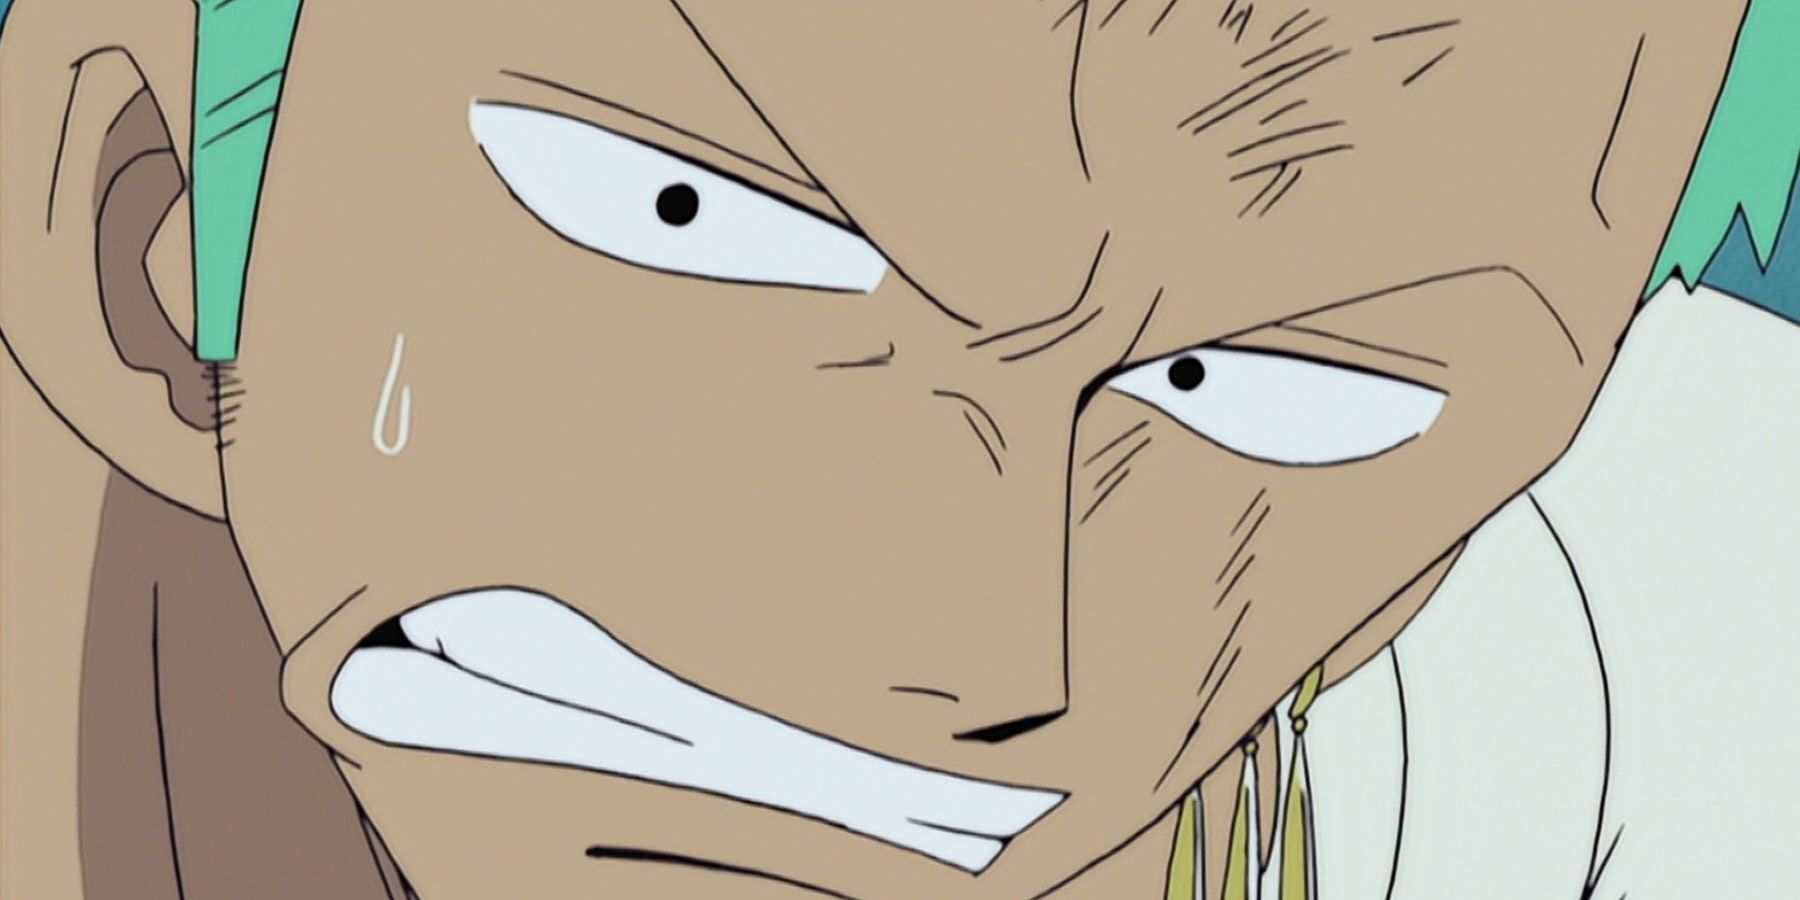 Roronoa Zoro bares his teeth and sweats during a fight in One Piece.